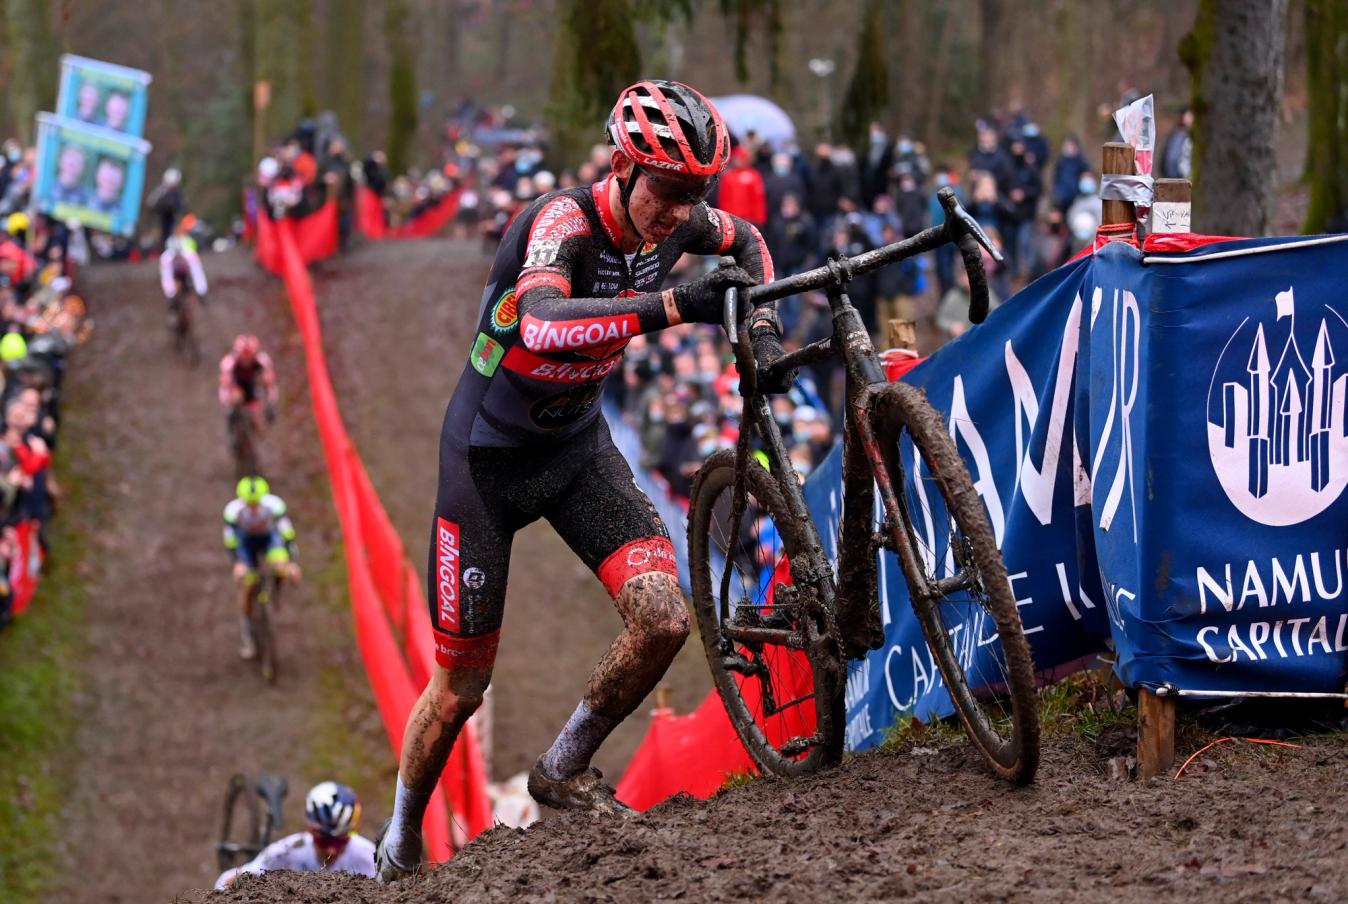 Michael Vanthourenhout got the better of Tom Pidcock in the last CX World Cup round to take place in Namur